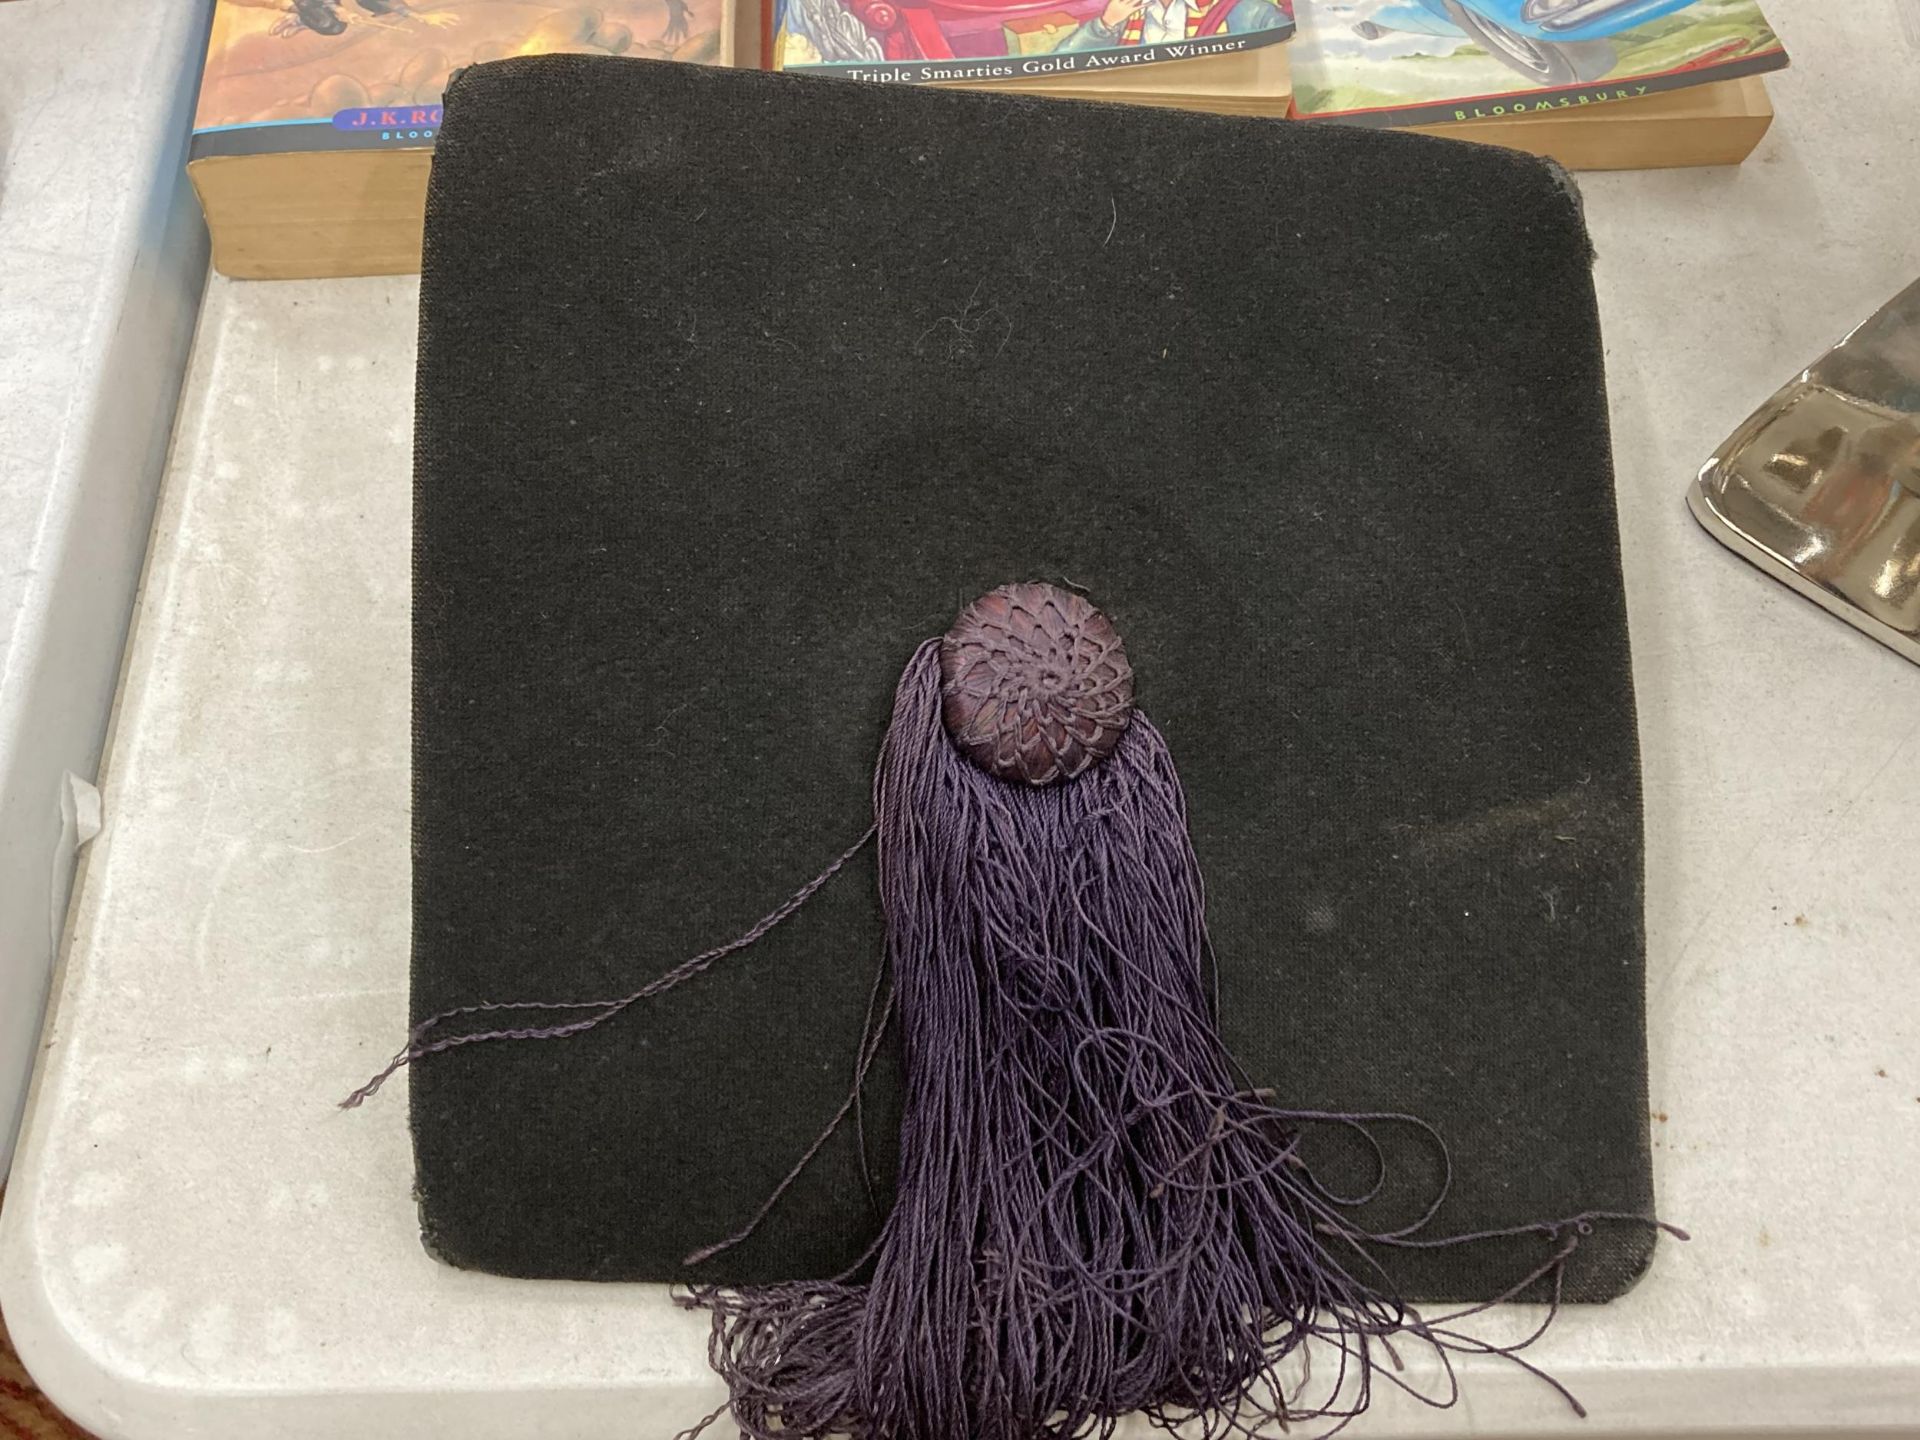 A UNIVERSITY MORTAR BOARD WITH A PURPLE TASSLE - Image 2 of 3